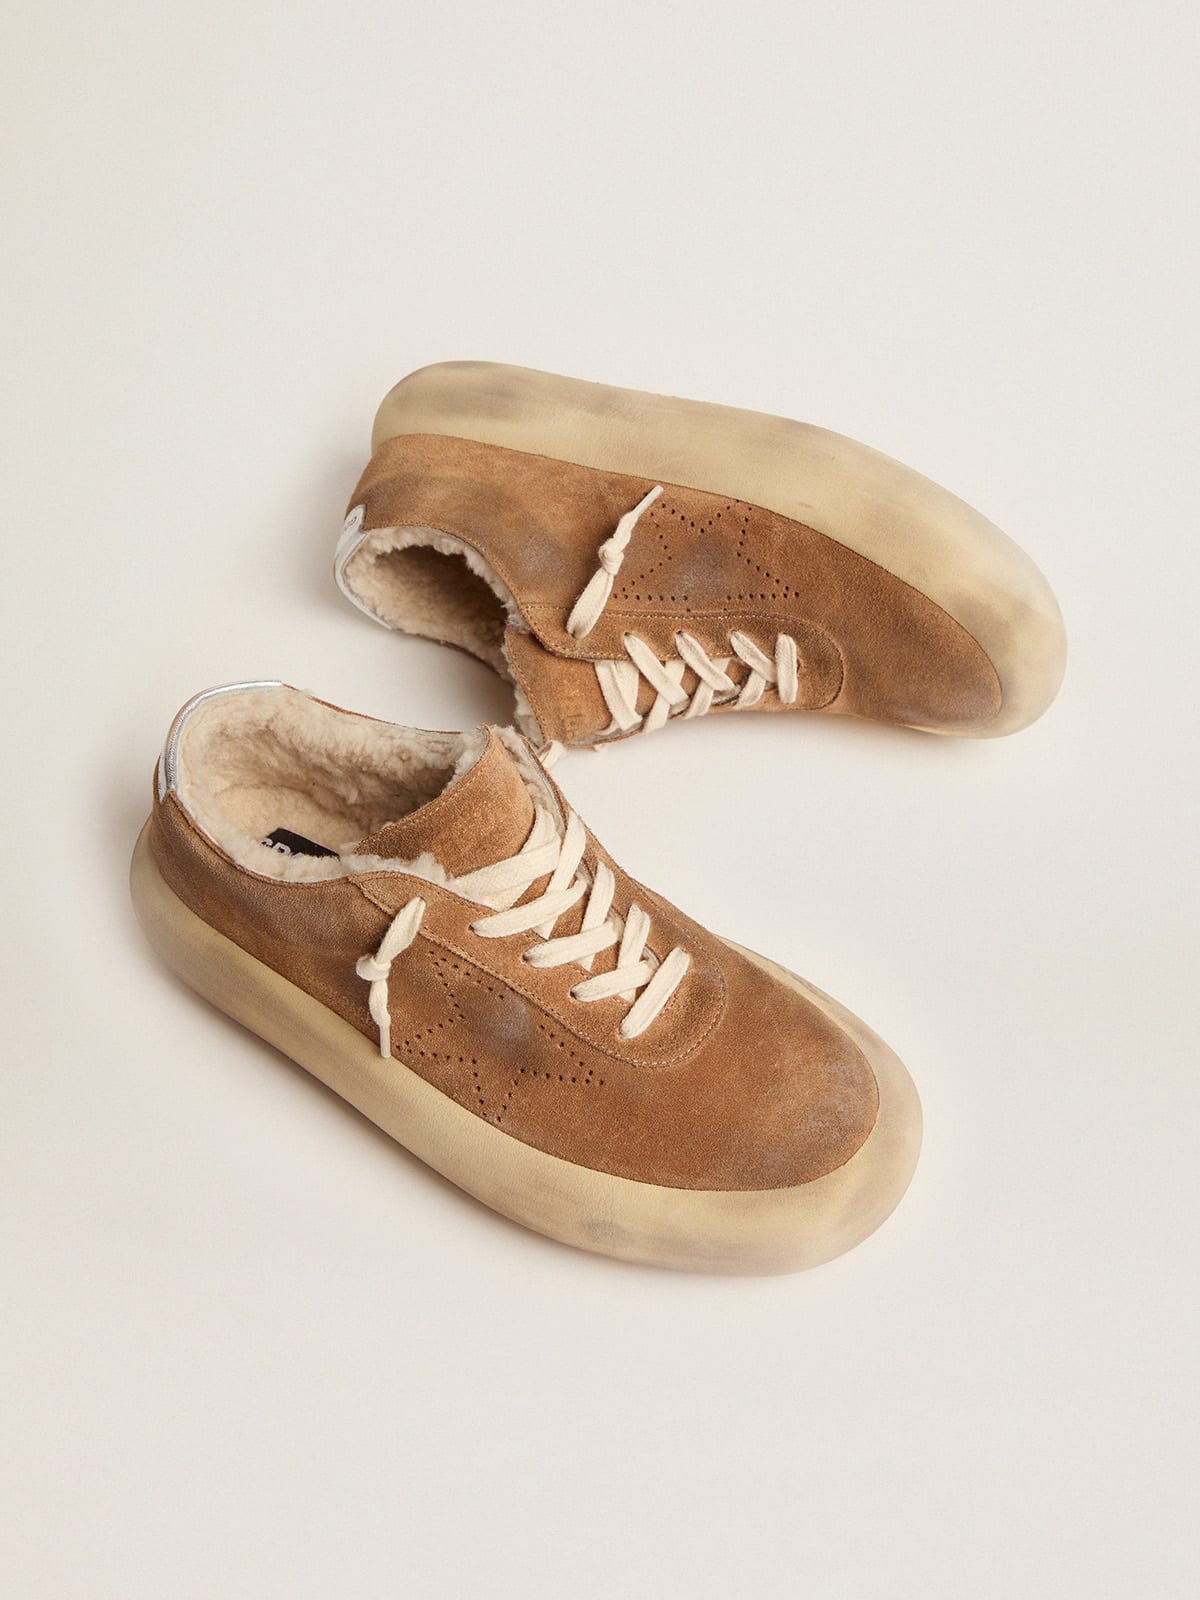 Golden Goose - Men's Space-Star in tobacco-colored suede and shearling lining in 